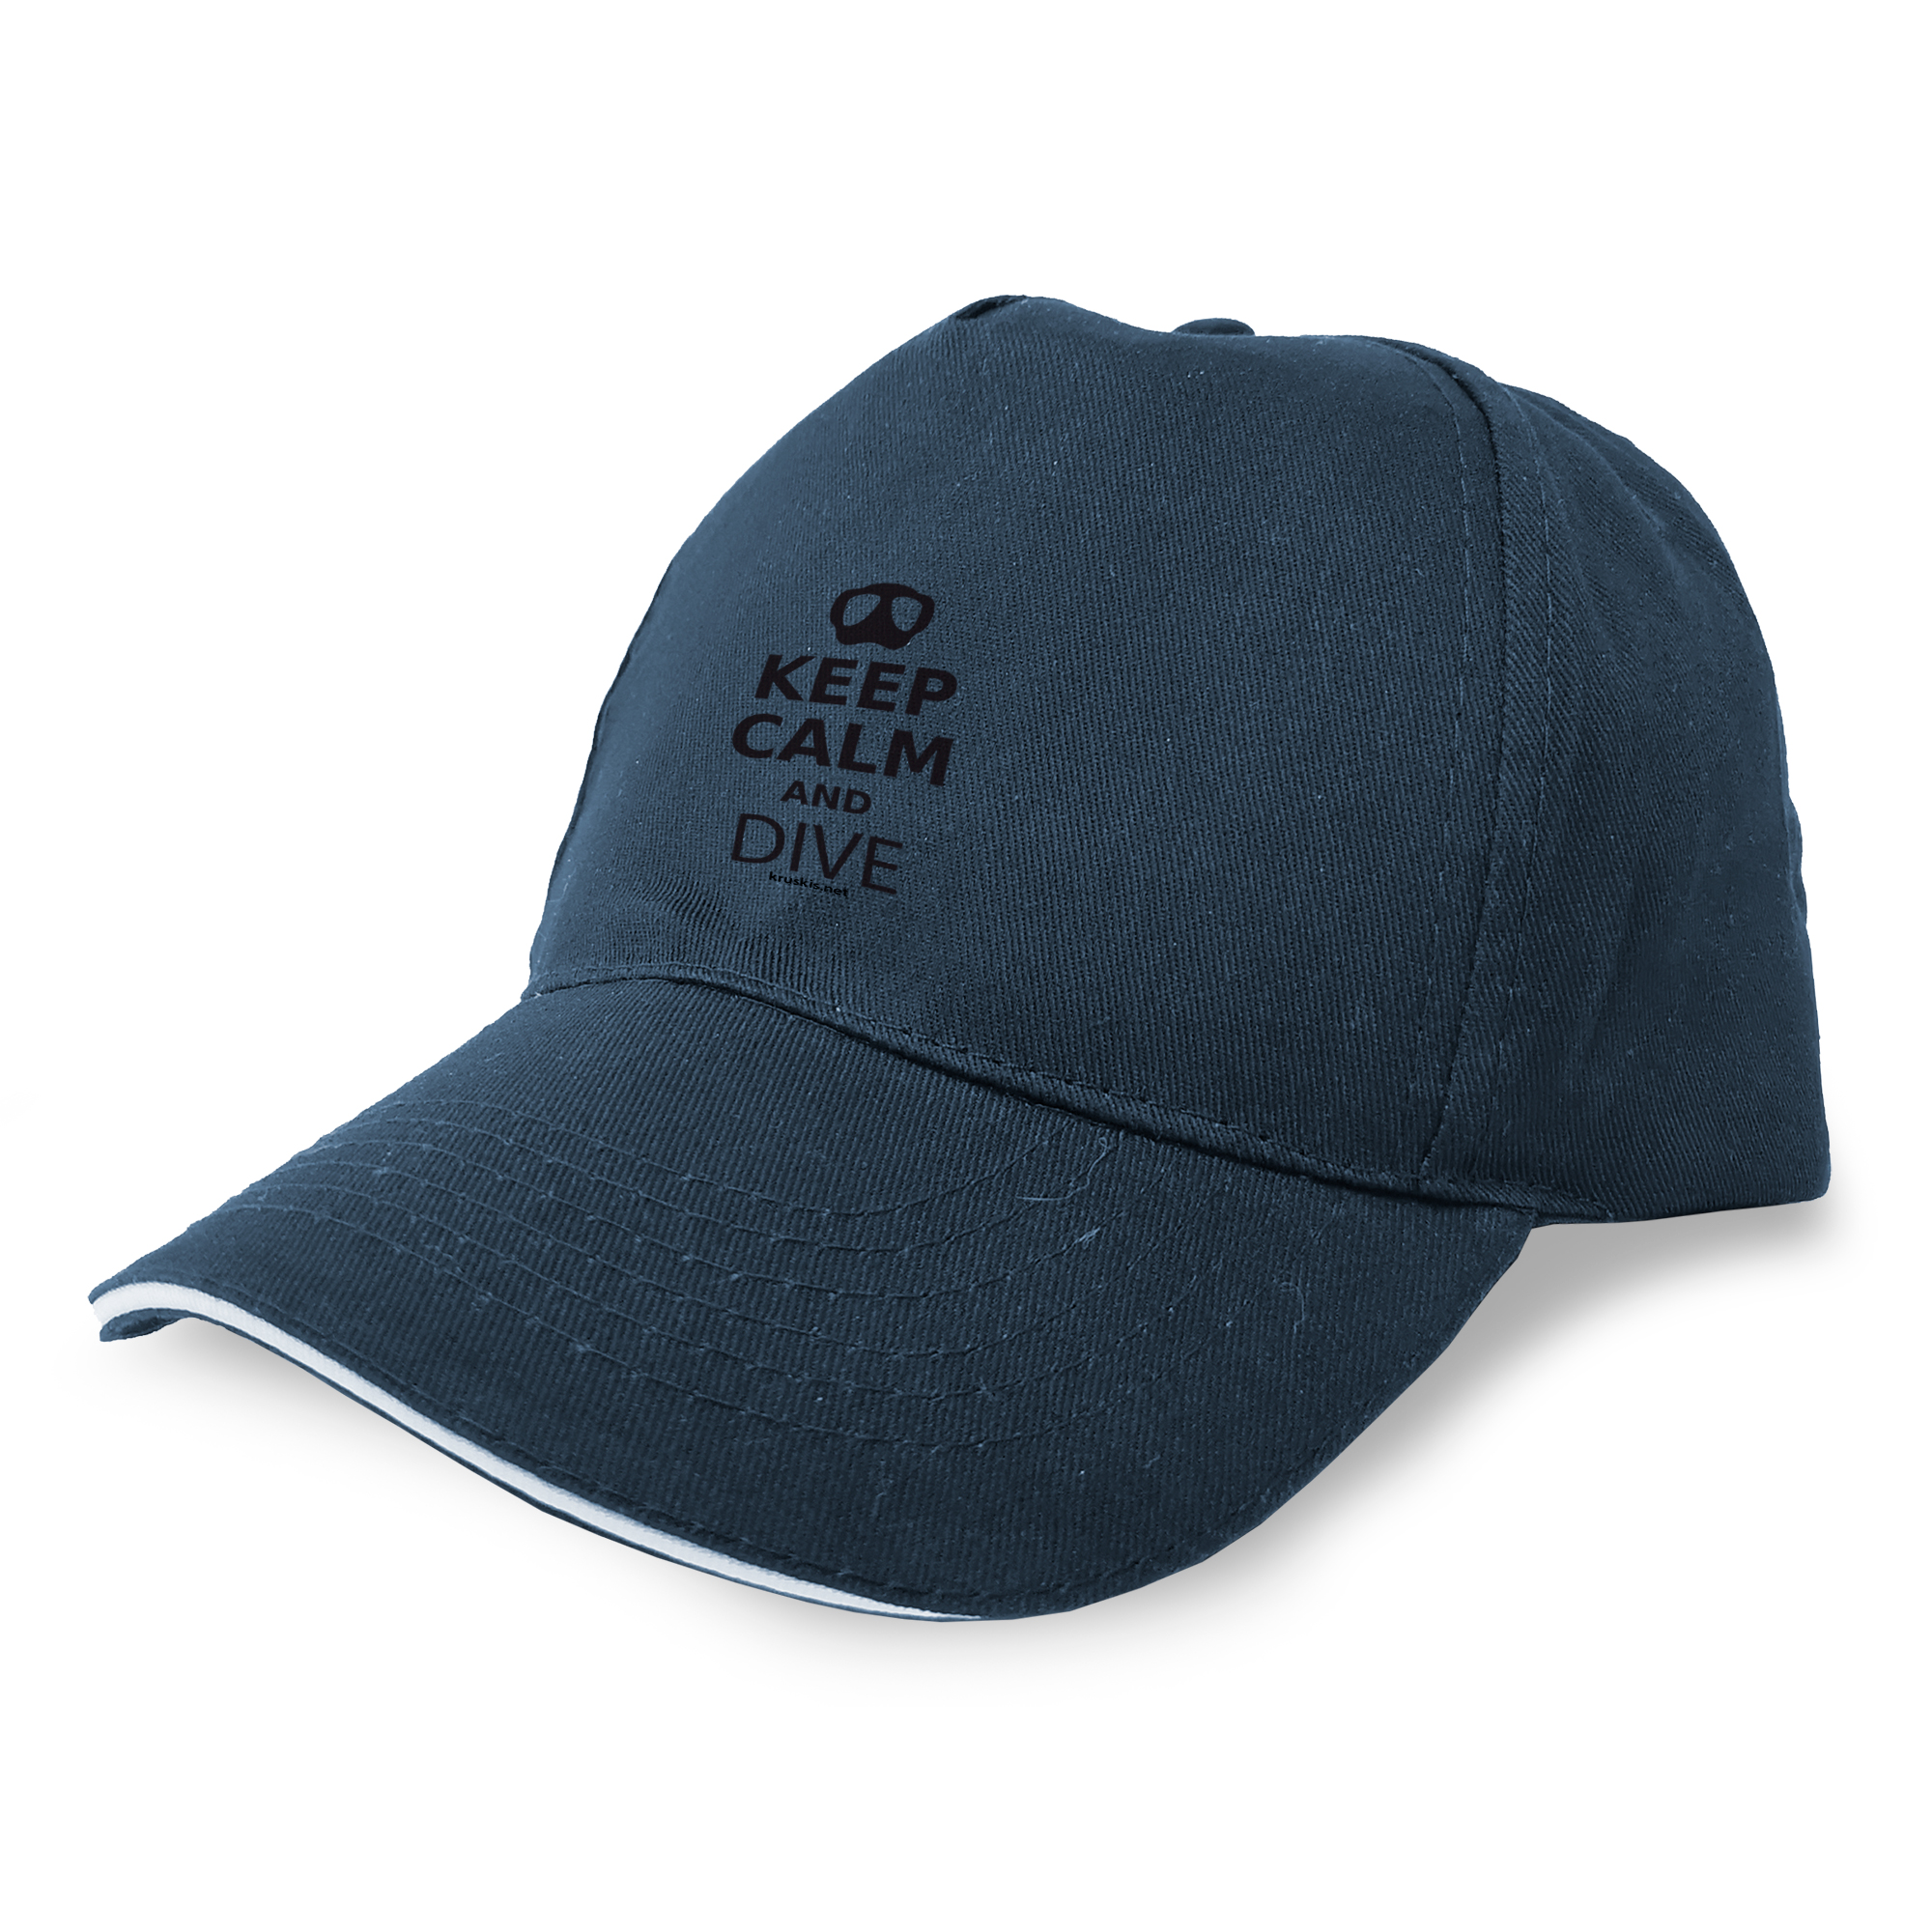 Cap Diving Keep Calm And Dive Unisex